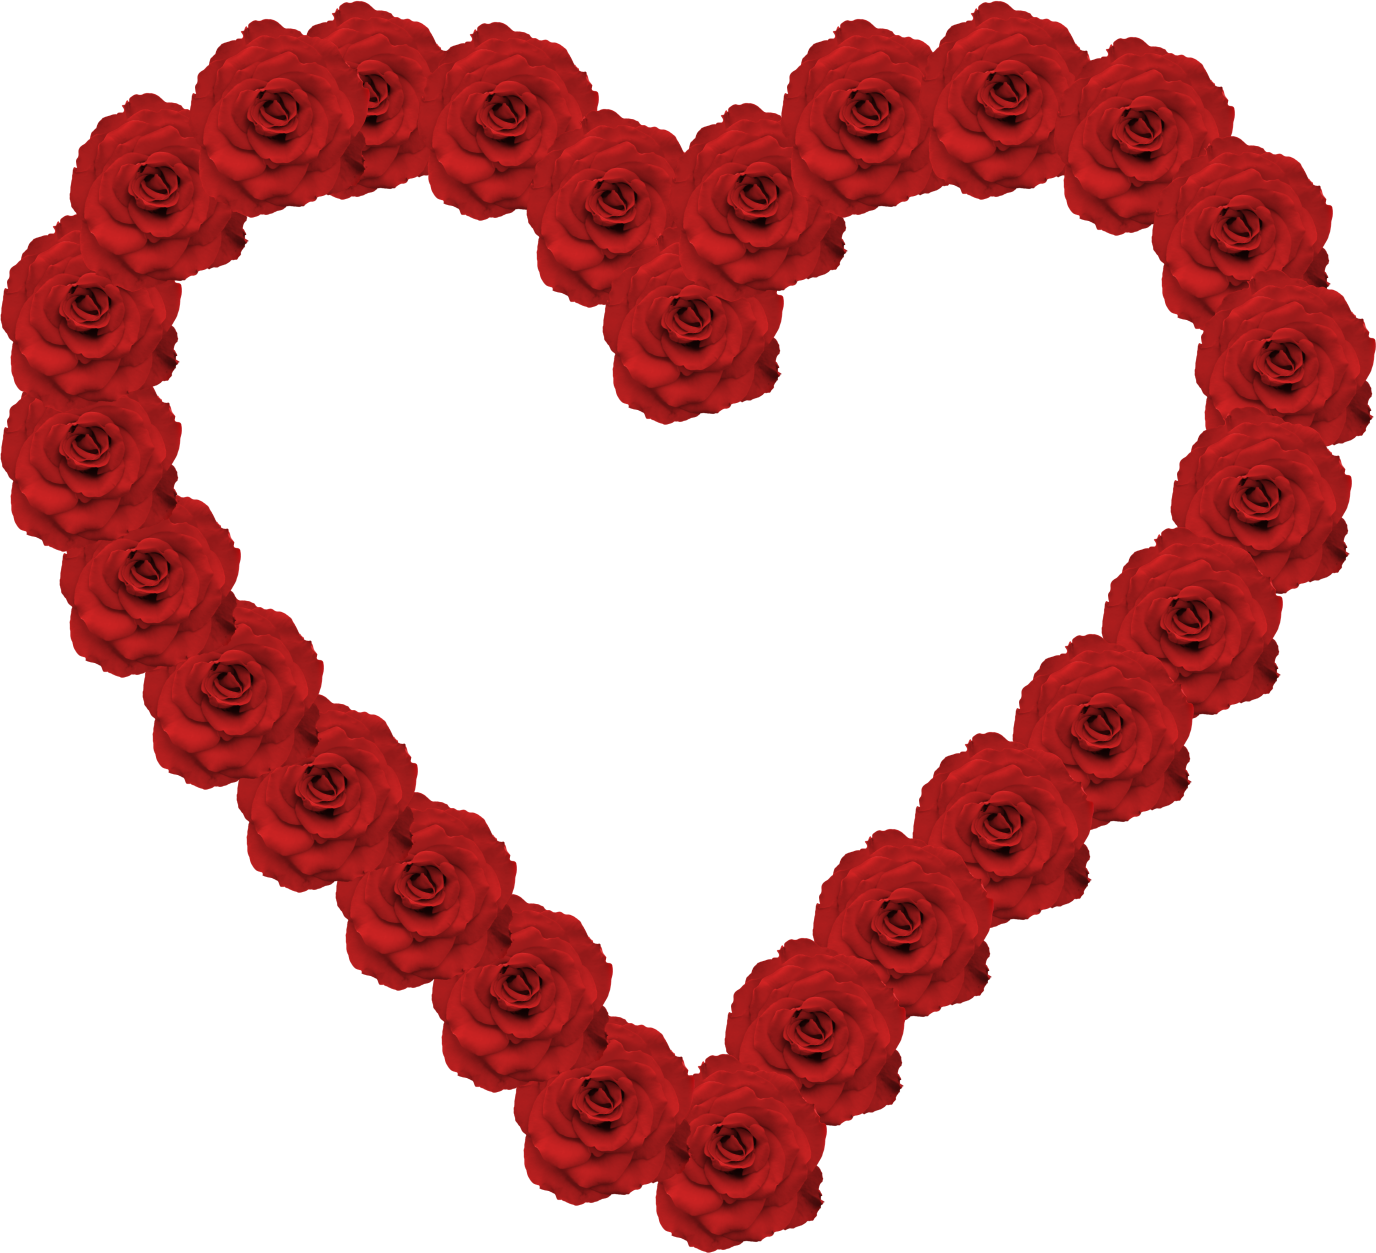 See Here Heart Face Clip Art Black And White - Rose Petals In A Heart - Png Download (1376x1253), Png Download